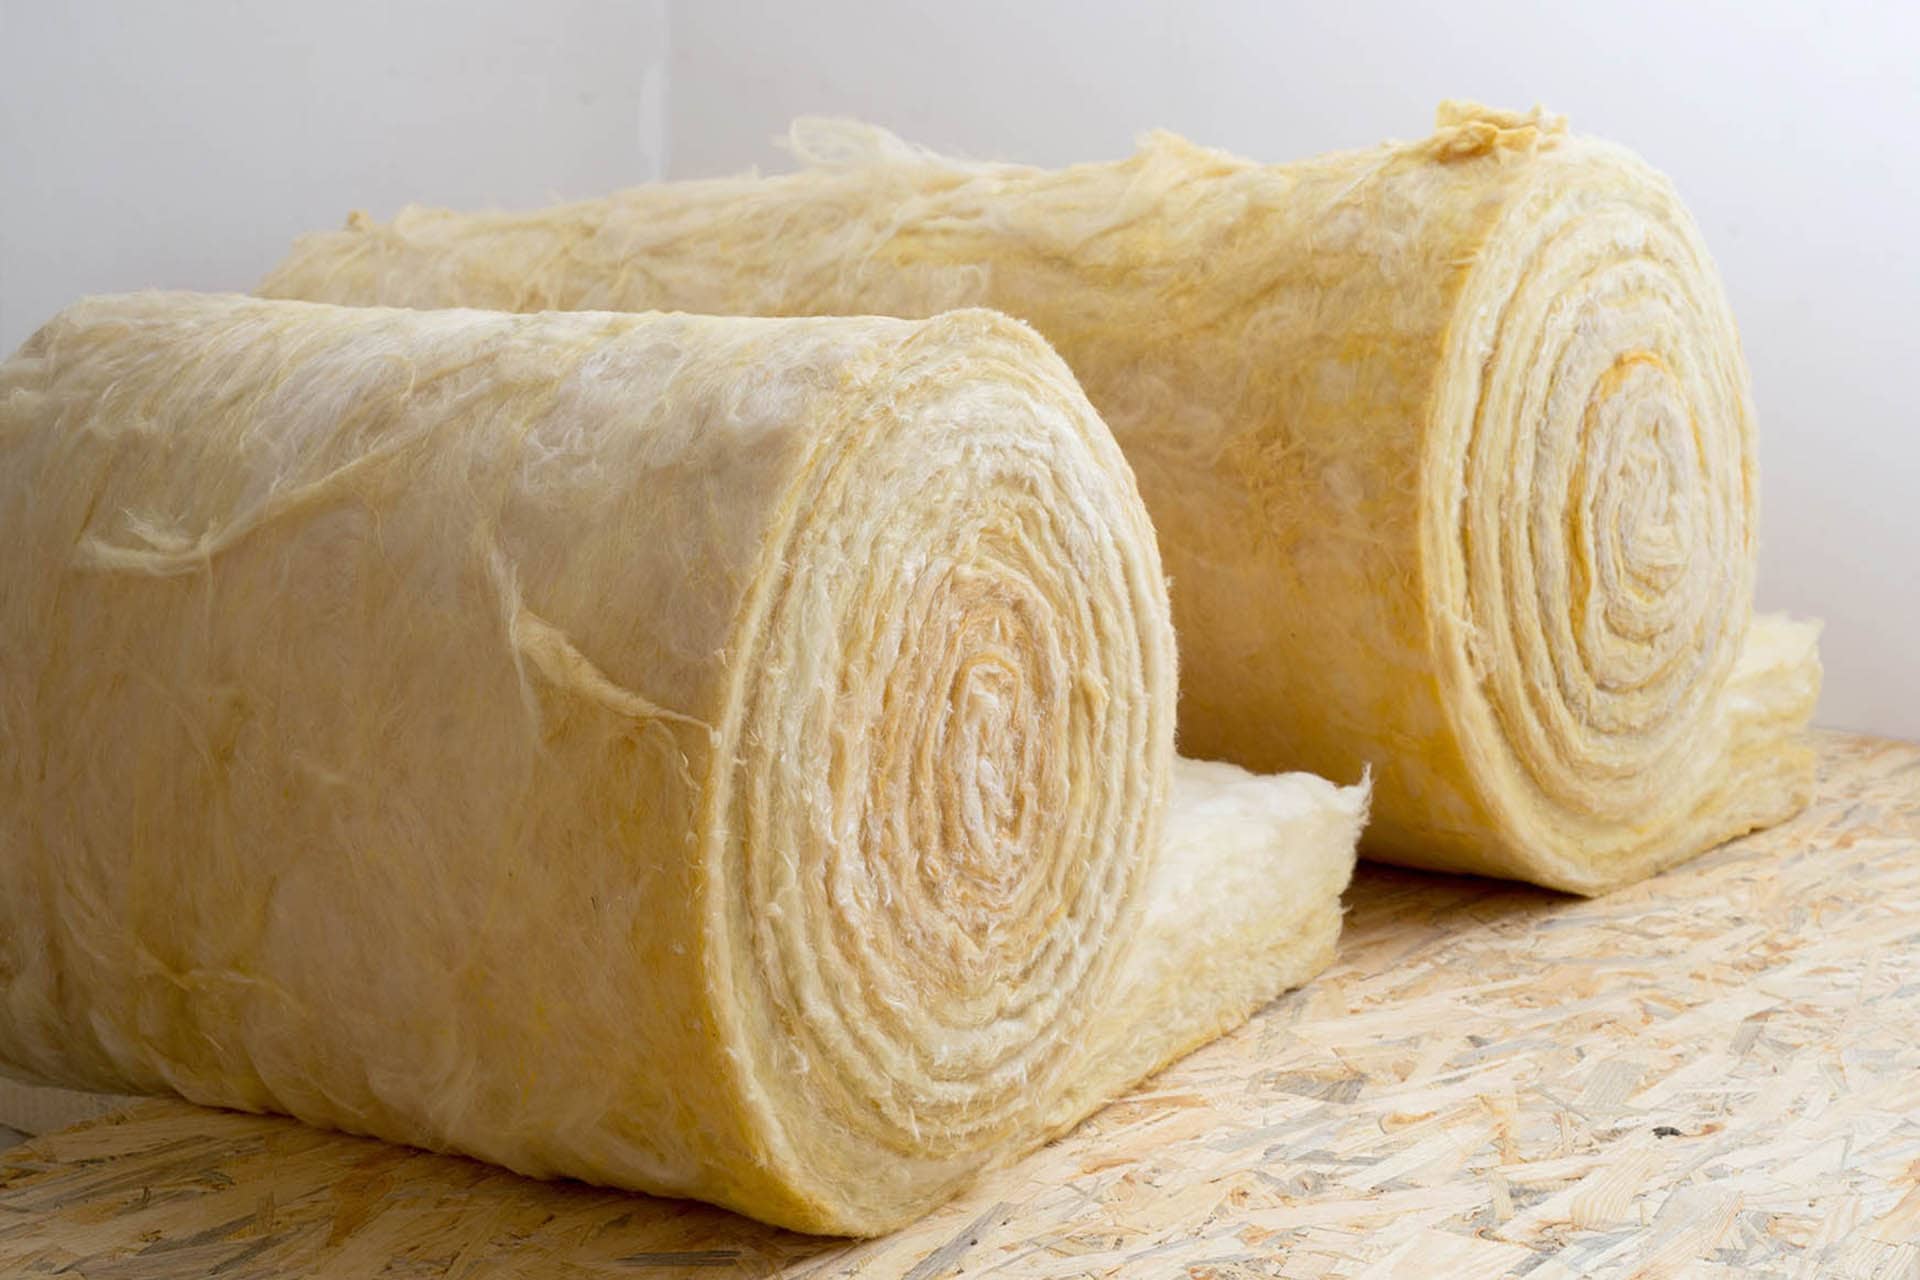 thermal-insulation-wool-rolls-on-chipboard-building-materials